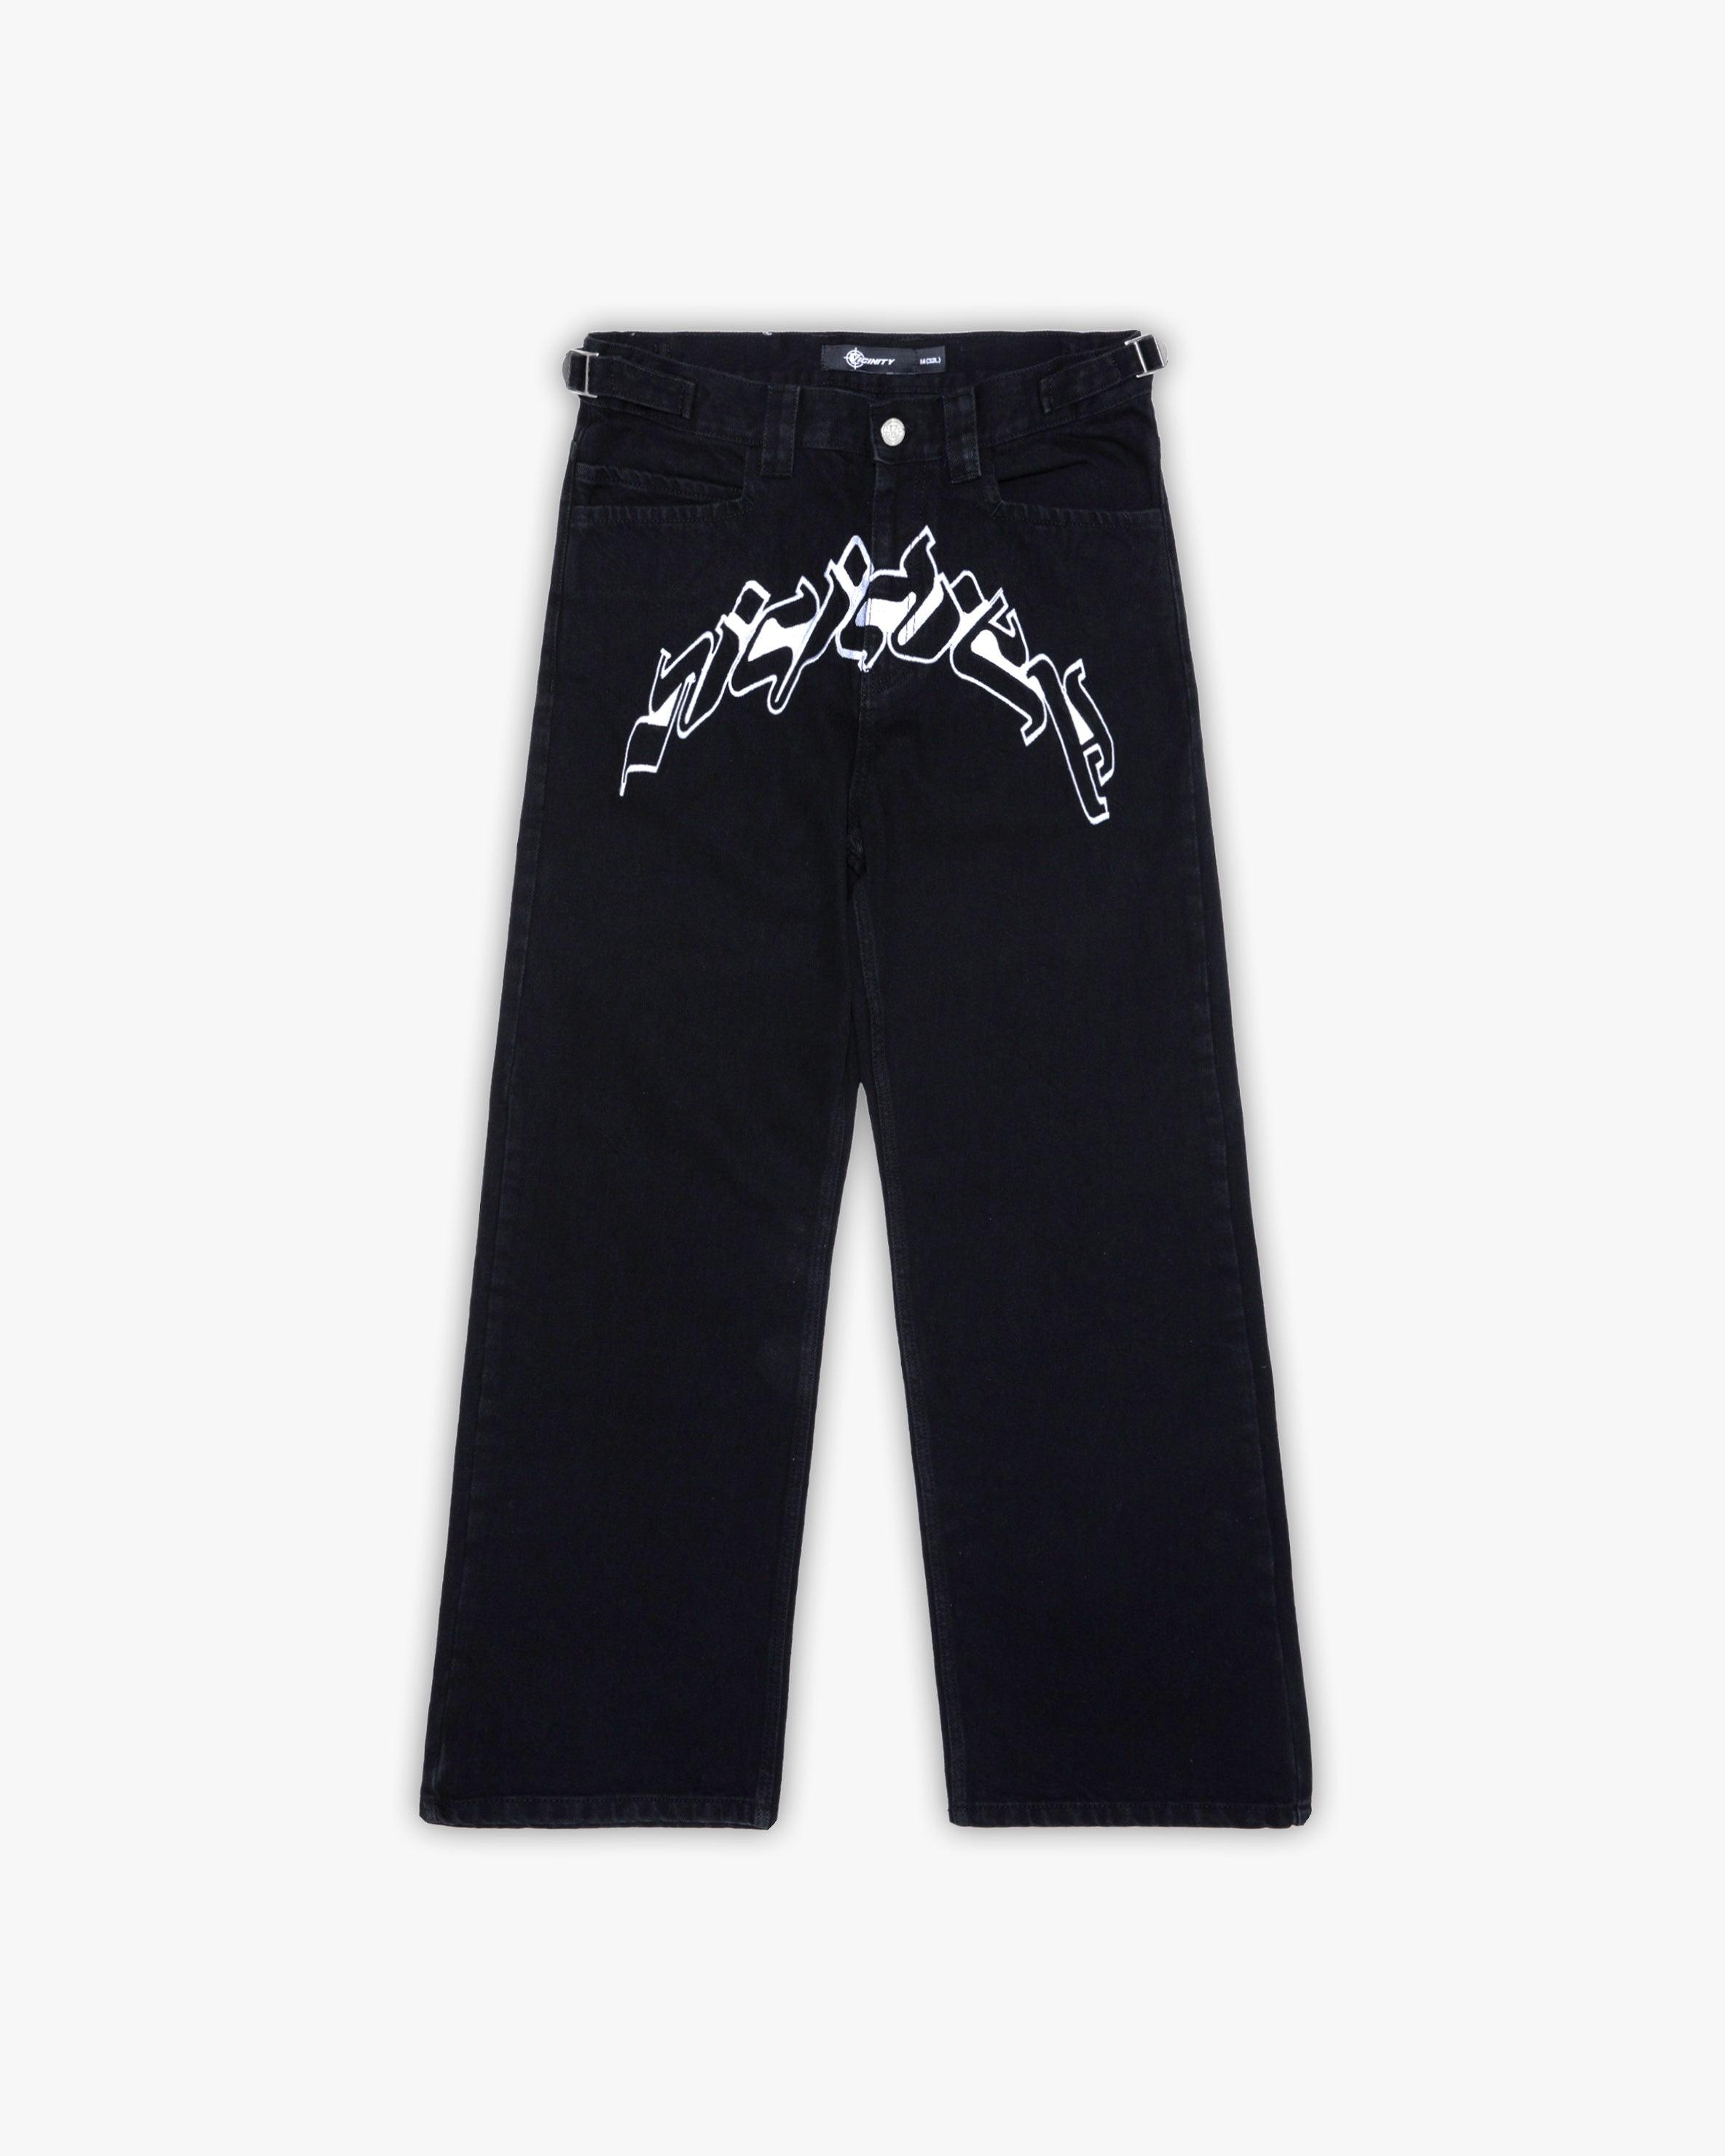 OUTLINED MIRAGE DENIM BLACK / WHITE – VICINITY